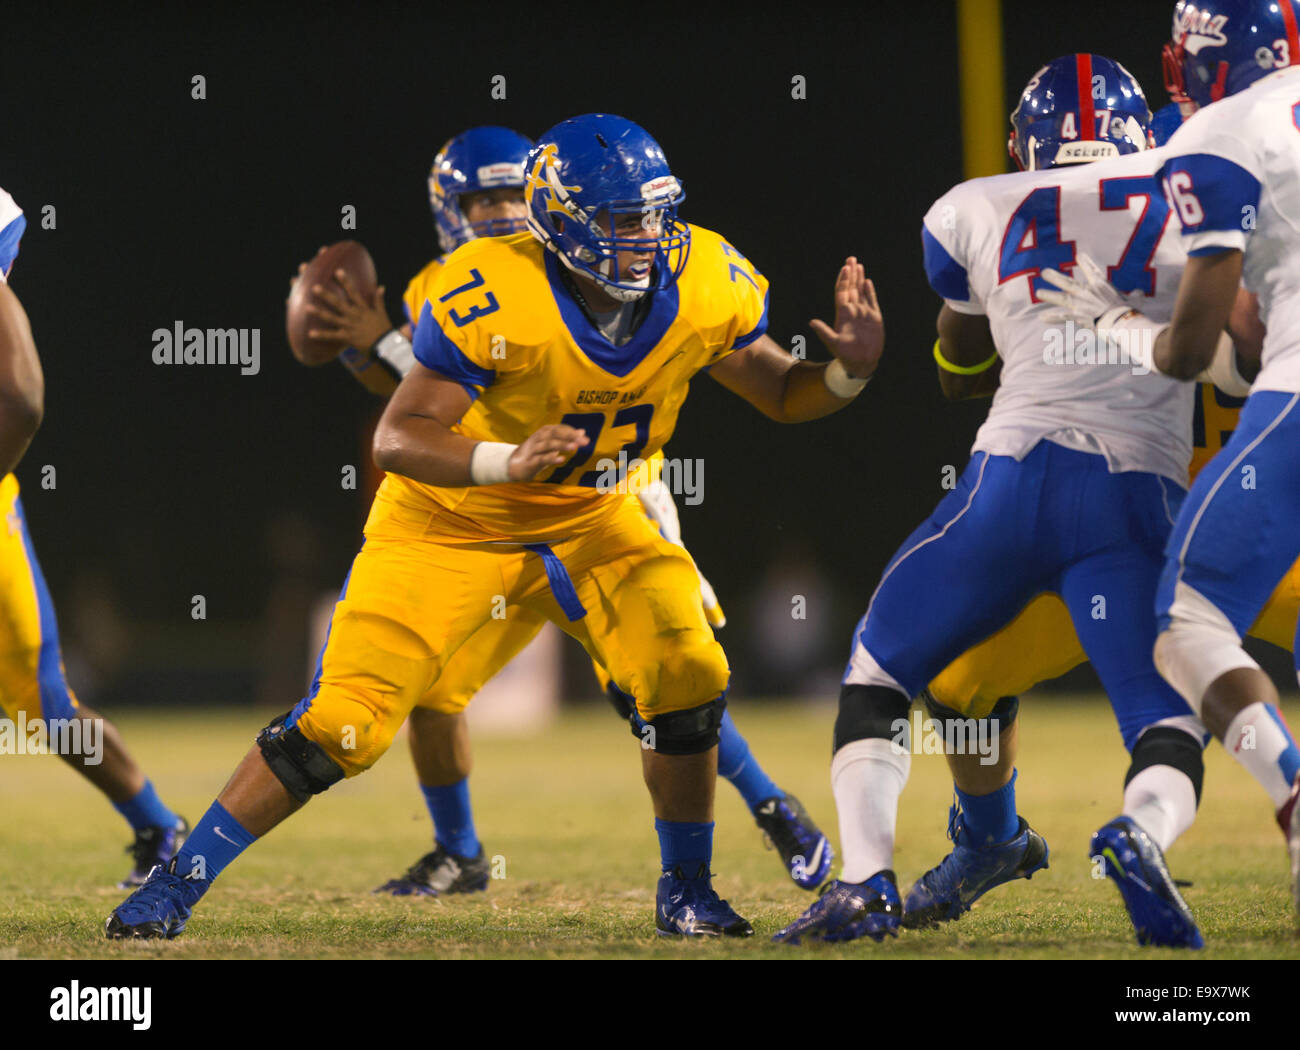 October 4, 2014, La Puente, CA.Bishop Amat lancers offensive line (73) Justin Ortiz in action during the Bishop Amat upset of the Cavaliers at Bishop Amat high school on October 3, 2014. The Cavaliers who are usually a nationally ranked high school football team, were upset by Bishop Amat 14 - 7. (Mandatory Credit: Ed Ruvalcaba/MarinMedia.org) (Complete photographer, and company credit required) Stock Photo